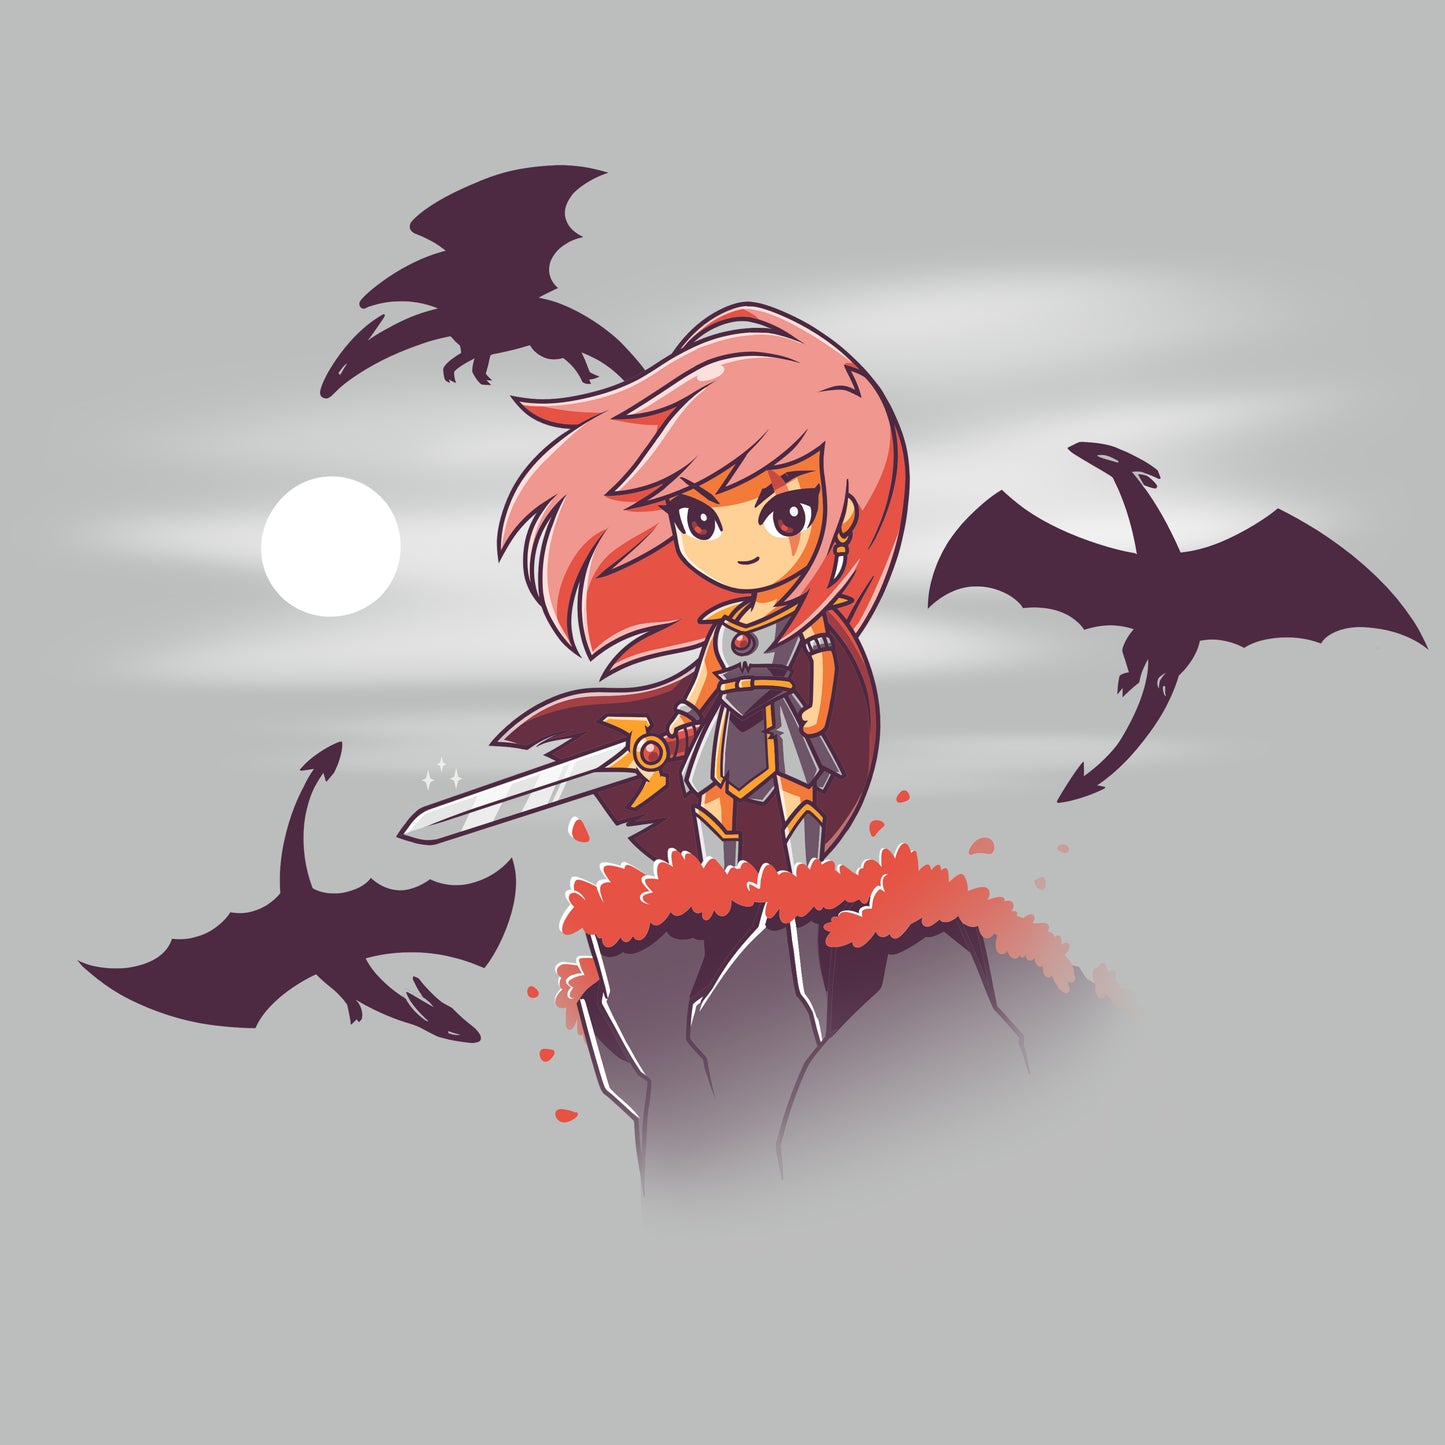 A TeeTurtle Warrior Princess with pink hair and a sword on top of a cliff, battling dragons.